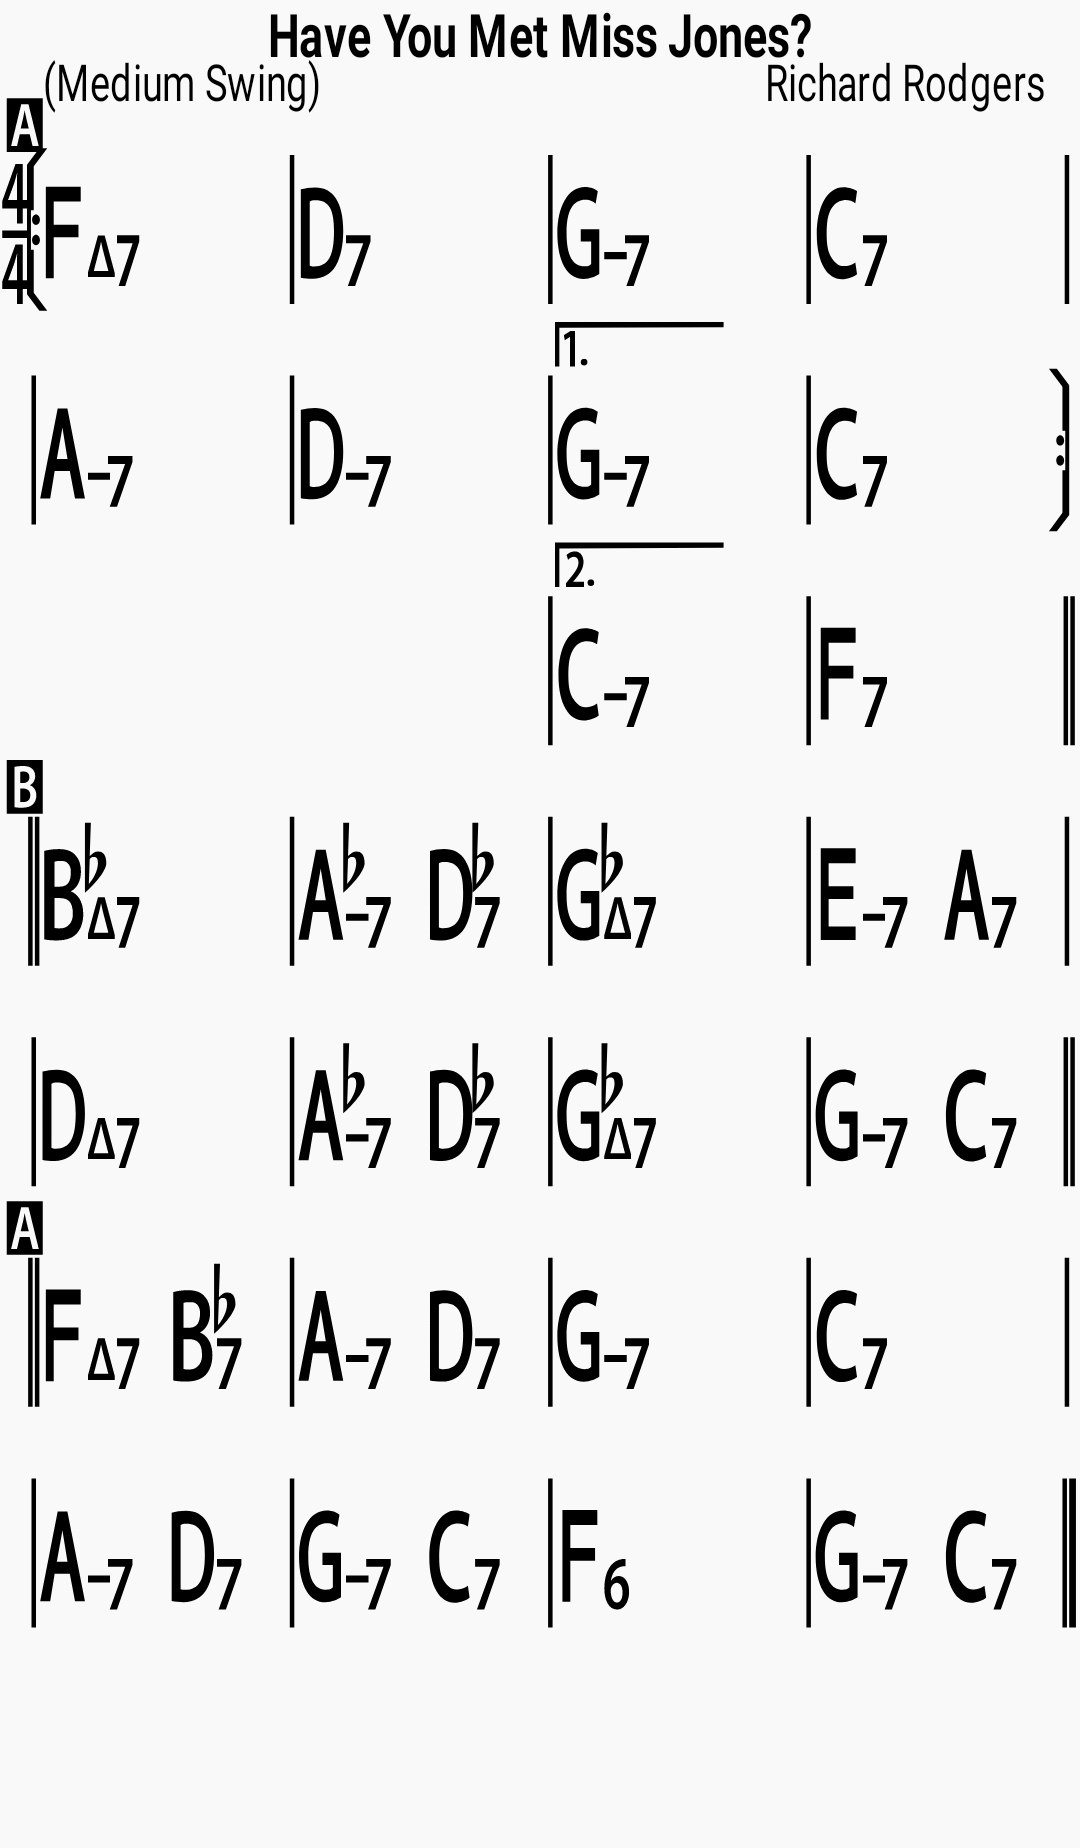 Chord chart for the jazz standard Have You Met Miss Jones